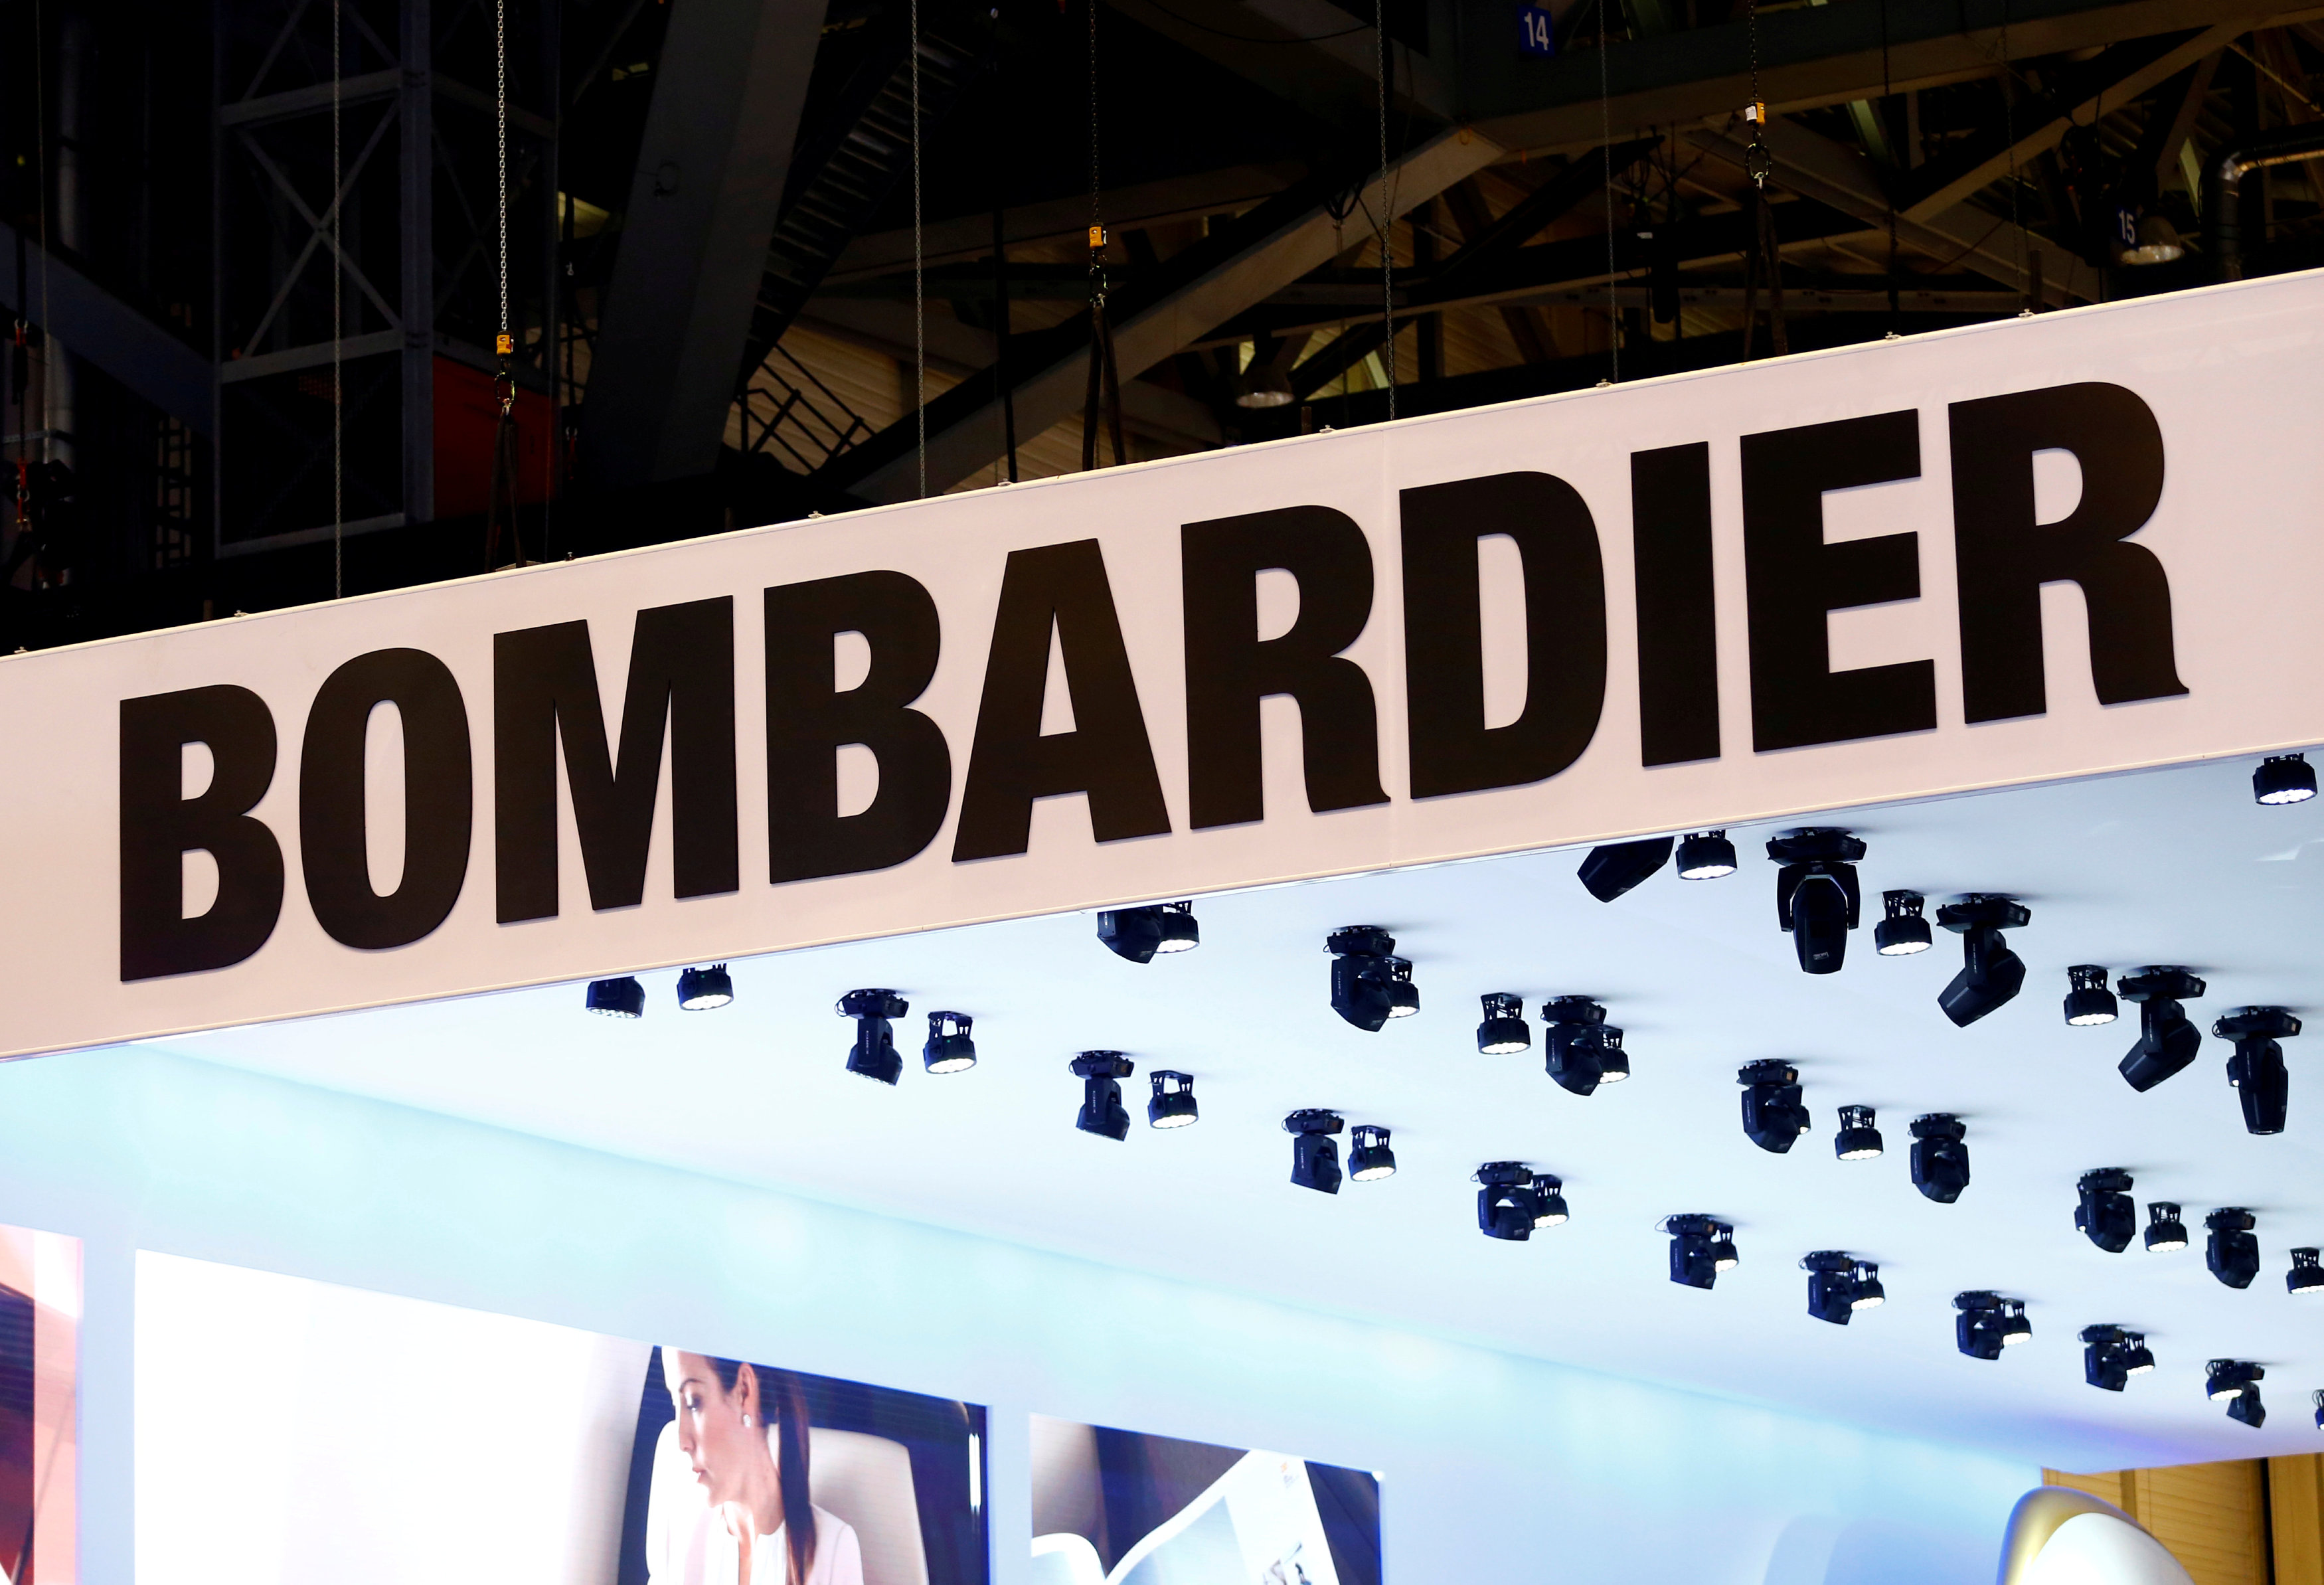 UK minister urges Boeing to hold talks to end Bombardier dispute